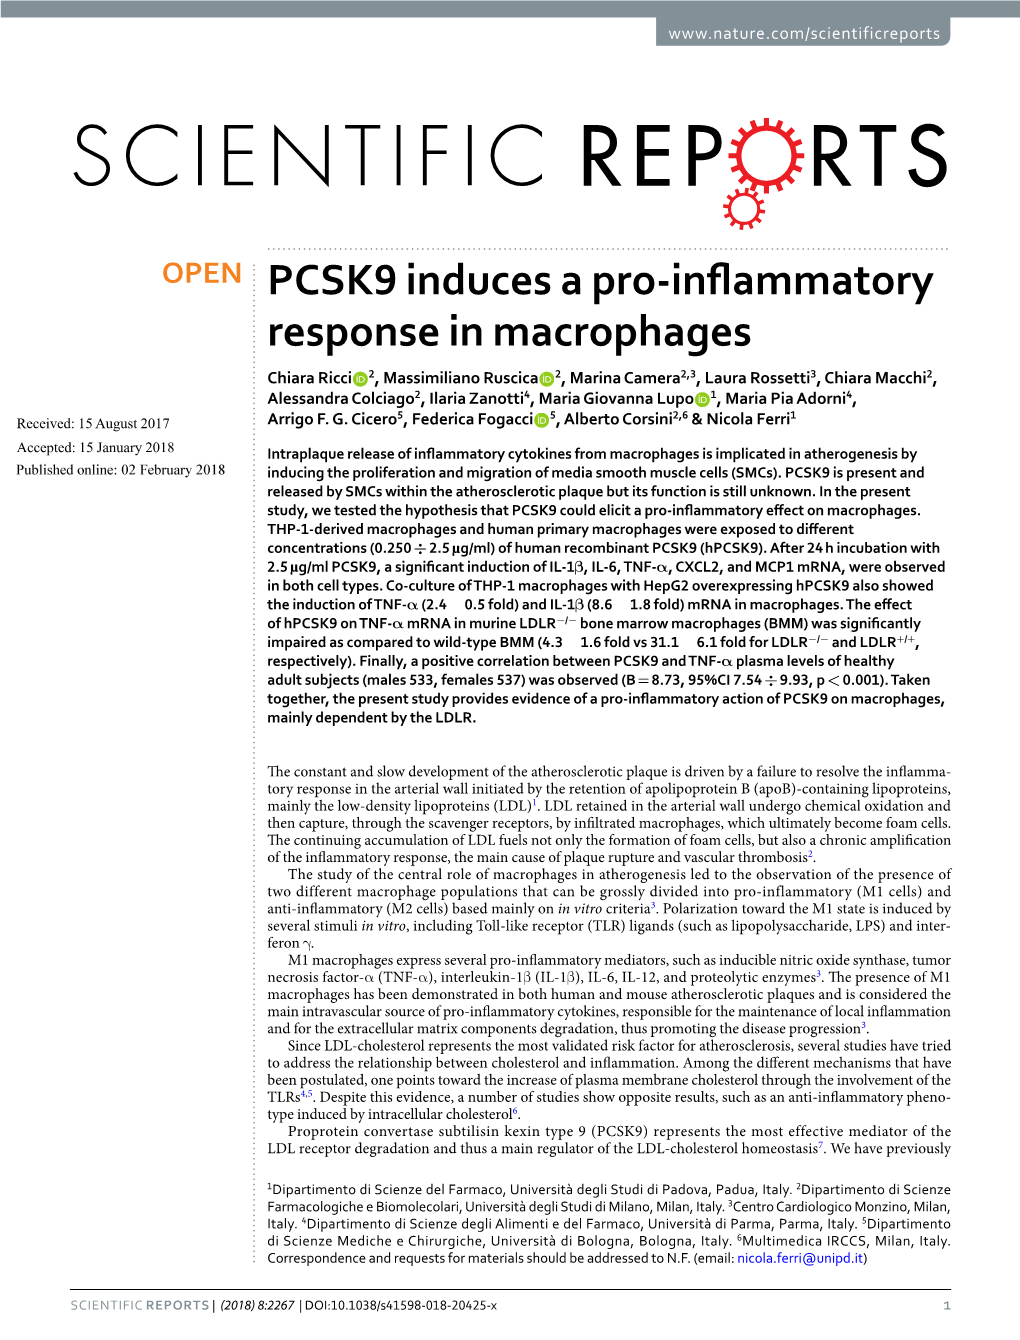 PCSK9 Induces a Pro-Inflammatory Response in Macrophages